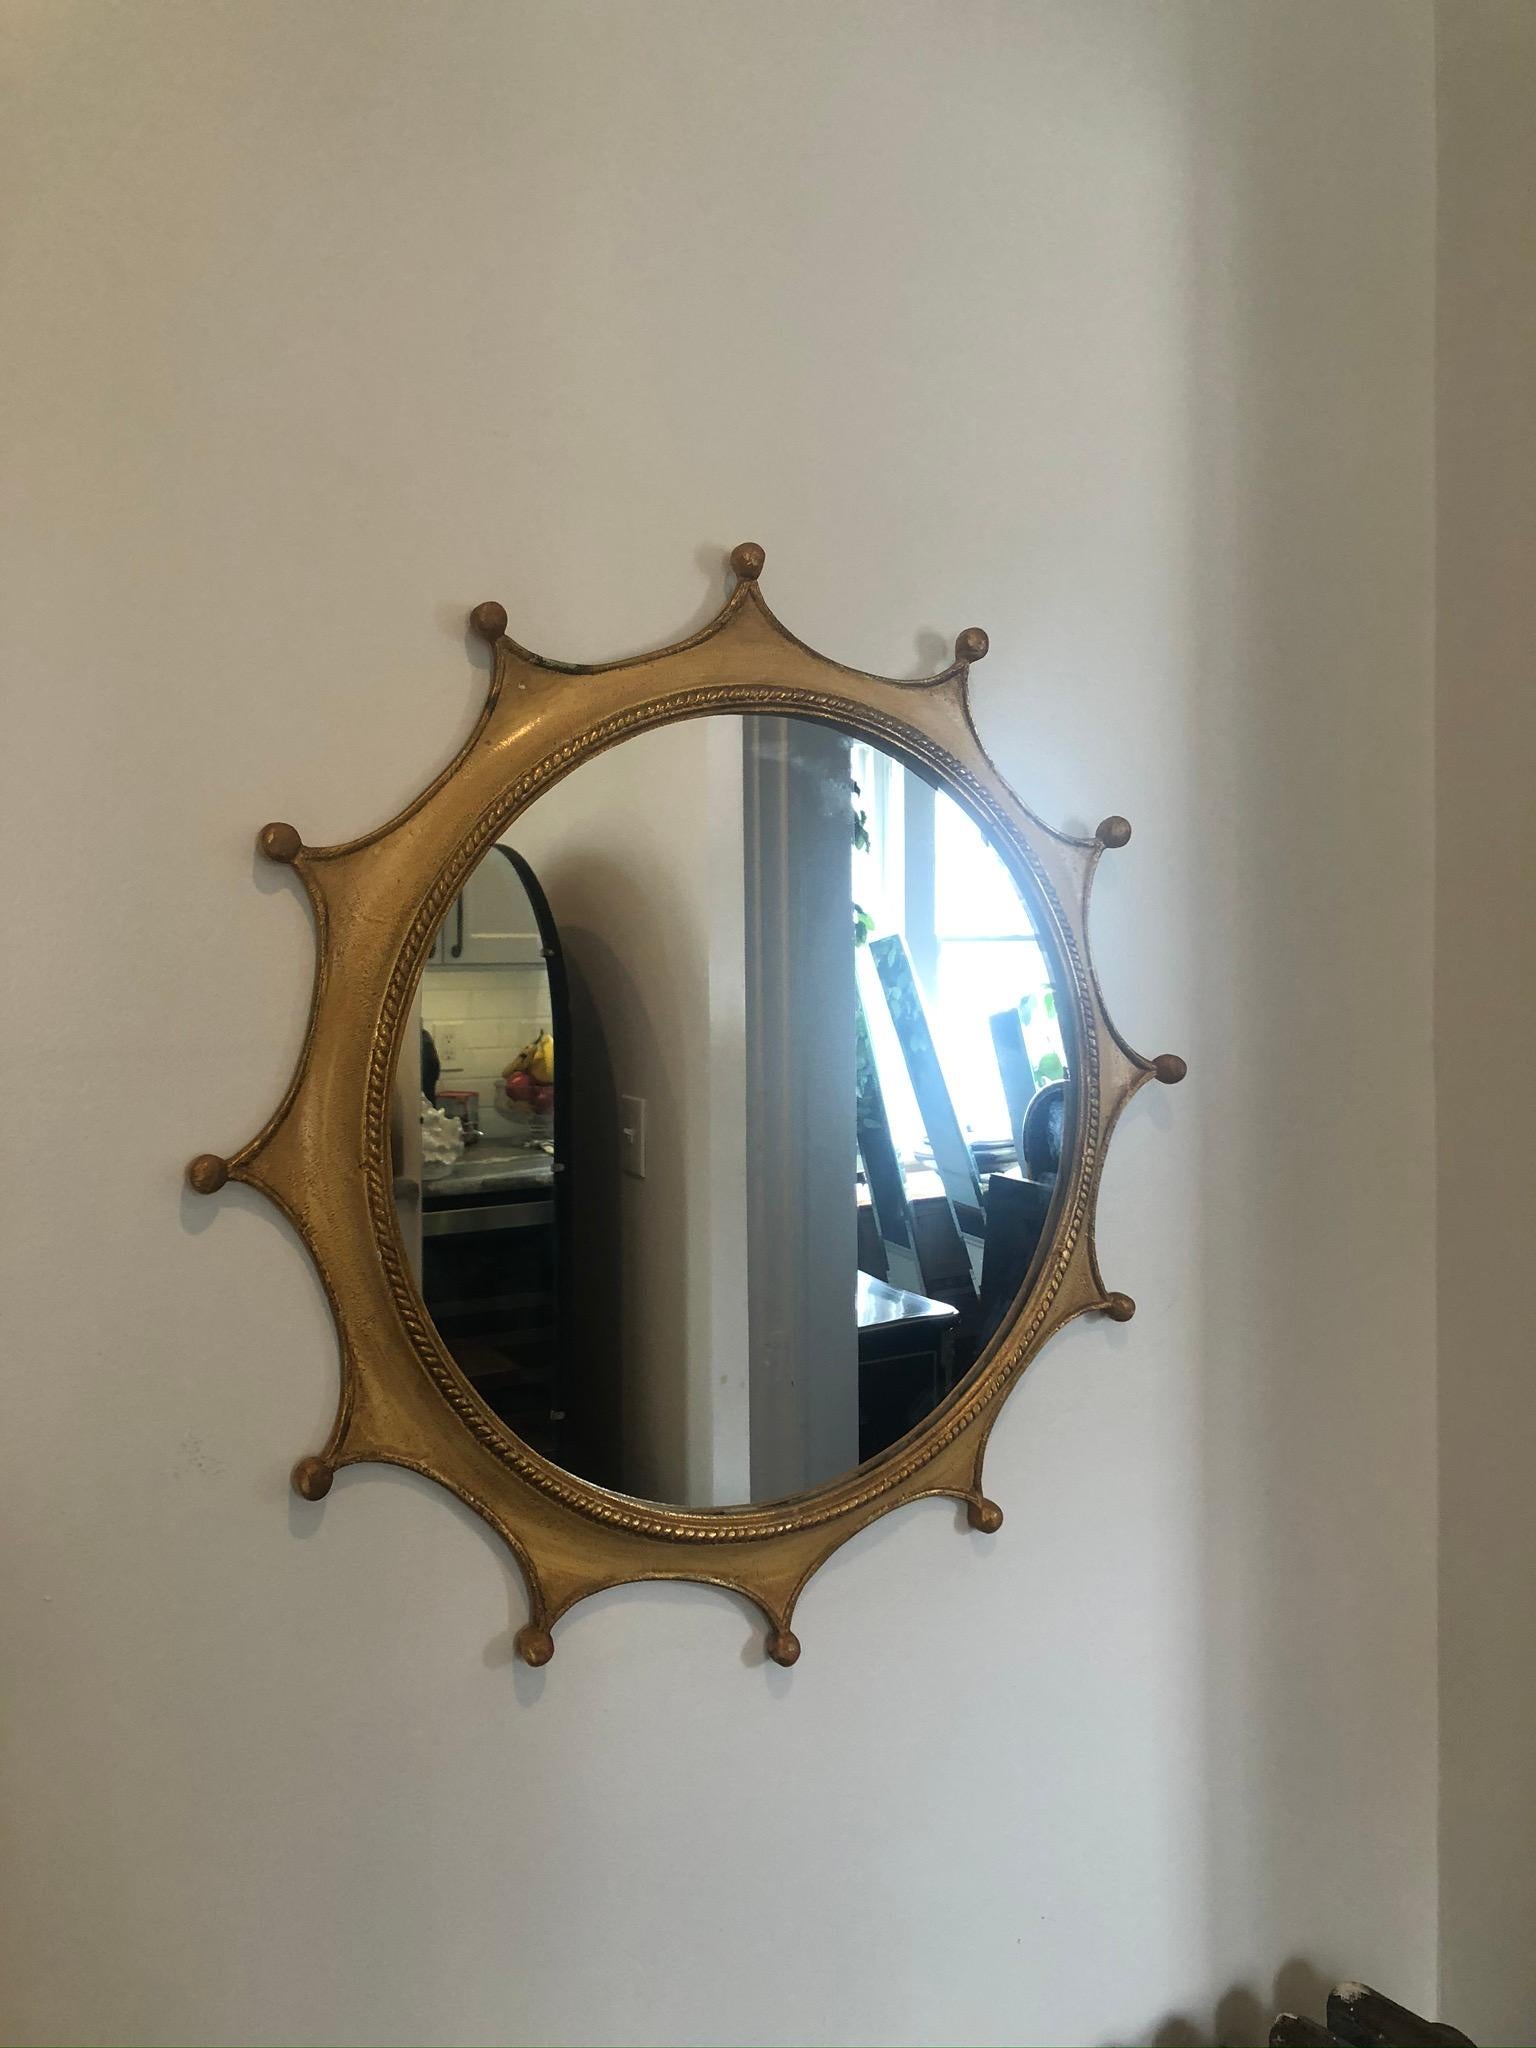 Stunning whimsical Palladio mirror made in Italy. Metal frame with crown or sunburst design complimented with an internal roping accent. Nicely patinated.